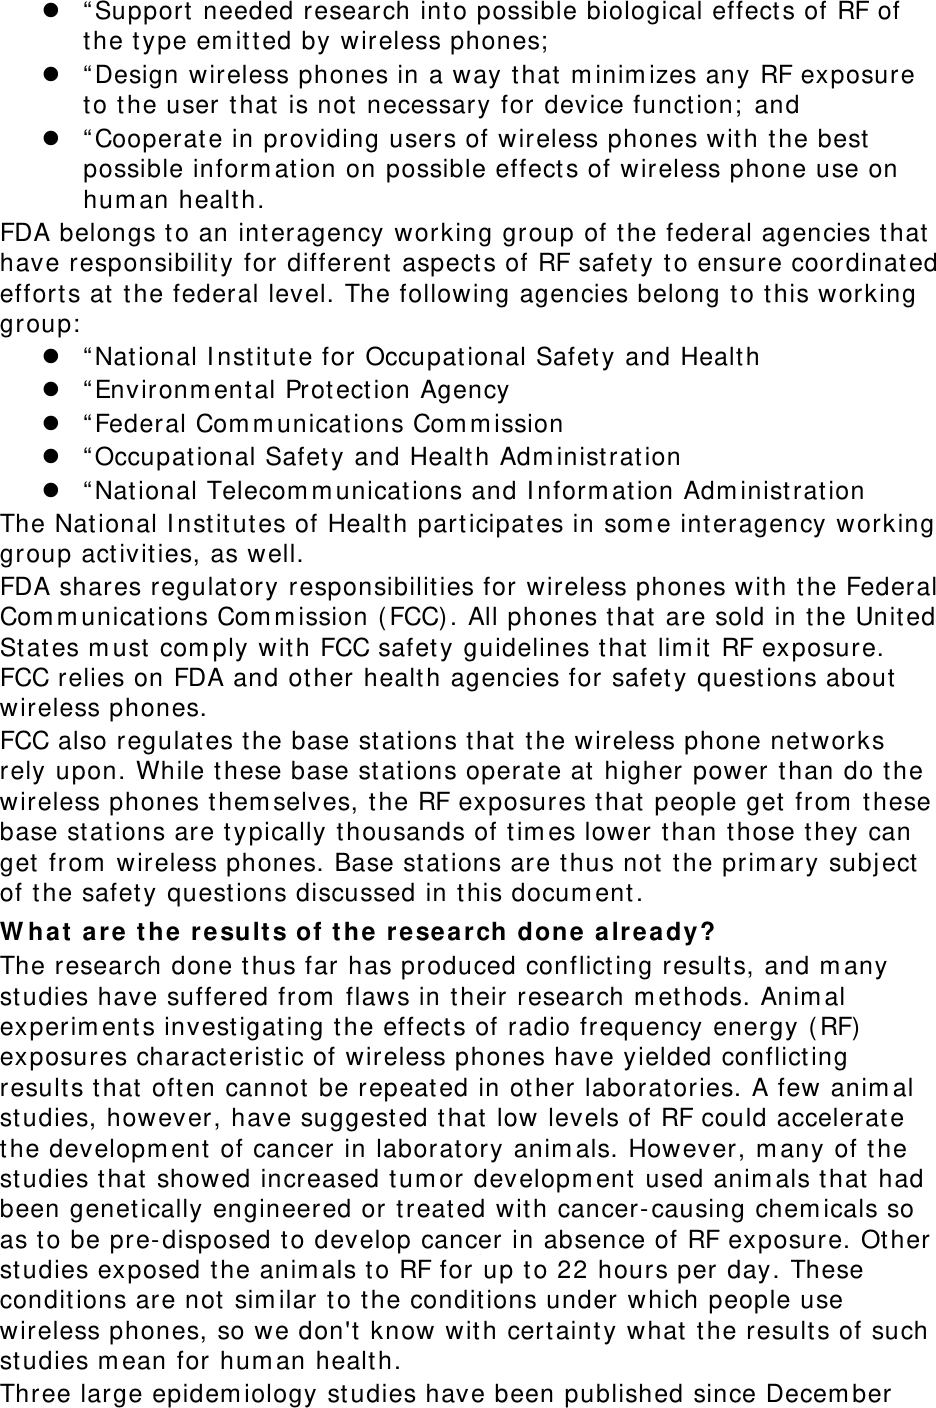  “ Support  needed research into possible biological effect s of RF of the t ype em it ted by wireless phones;   “ Design wireless phones in a way t hat  m inim izes any RF exposure to t he user t hat  is not  necessary for device funct ion;  and  “ Cooperate in providing users of wireless phones with t he best possible inform ation on possible effect s of wireless phone use on hum an healt h. FDA belongs t o an int eragency working group of t he federal agencies t hat  have responsibilit y for different aspects of RF safet y t o ensure coordinat ed efforts at  the federal level. The following agencies belong to this working group:   “ Nat ional I nst it ut e for Occupat ional Safety and Healt h  “ Environm ent al Prot ect ion Agency  “ Federal Com m unications Com m ission  “ Occupat ional Safet y and Health Adm inist ration  “ Nat ional Telecom m unicat ions and I nform at ion Adm inist rat ion The Nat ional I nst it ut es of Healt h participat es in som e int eragency working group activities, as well. FDA shares regulatory responsibilit ies for wireless phones wit h t he Federal Com m unicat ions Com m ission ( FCC) . All phones that  are sold in the Unit ed St at es m ust  com ply wit h FCC safet y guidelines t hat  lim it RF exposure. FCC relies on FDA and ot her healt h agencies for safet y questions about wireless phones. FCC also regulat es t he base st at ions t hat  t he wireless phone net works rely upon. While these base st at ions operate at  higher power t han do t he wireless phones them selves, the RF exposures t hat  people get  from  t hese base st at ions are typically t housands of tim es lower t han those they can get  from  wireless phones. Base st at ions are t hus not  the prim ary subj ect  of t he safety questions discussed in t his docum ent . W hat  are t h e  resu lt s of t he rese a rch done a lready? The research done t hus far has produced conflict ing result s, and m any studies have suffered from  flaws in t heir research m et hods. Anim al experim ent s invest igating the effects of radio frequency energy ( RF)  exposures characterist ic of wireless phones have yielded conflicting result s that often cannot be repeated in ot her laboratories. A few anim al studies, however, have suggested t hat low levels of RF could accelerat e the developm ent of cancer in laboratory anim als. However, m any of the studies t hat showed increased tum or developm ent  used anim als t hat  had been genetically engineered or treat ed wit h cancer-causing chem icals so as to be pre- disposed t o develop cancer in absence of RF exposure. Ot her studies exposed t he anim als t o RF for up t o 22 hours per day. These condit ions are not  sim ilar t o t he condit ions under which people use wireless phones, so we don&apos;t  know wit h certaint y what t he result s of such studies m ean for hum an healt h. Three large epidem iology studies have been published since Decem ber 